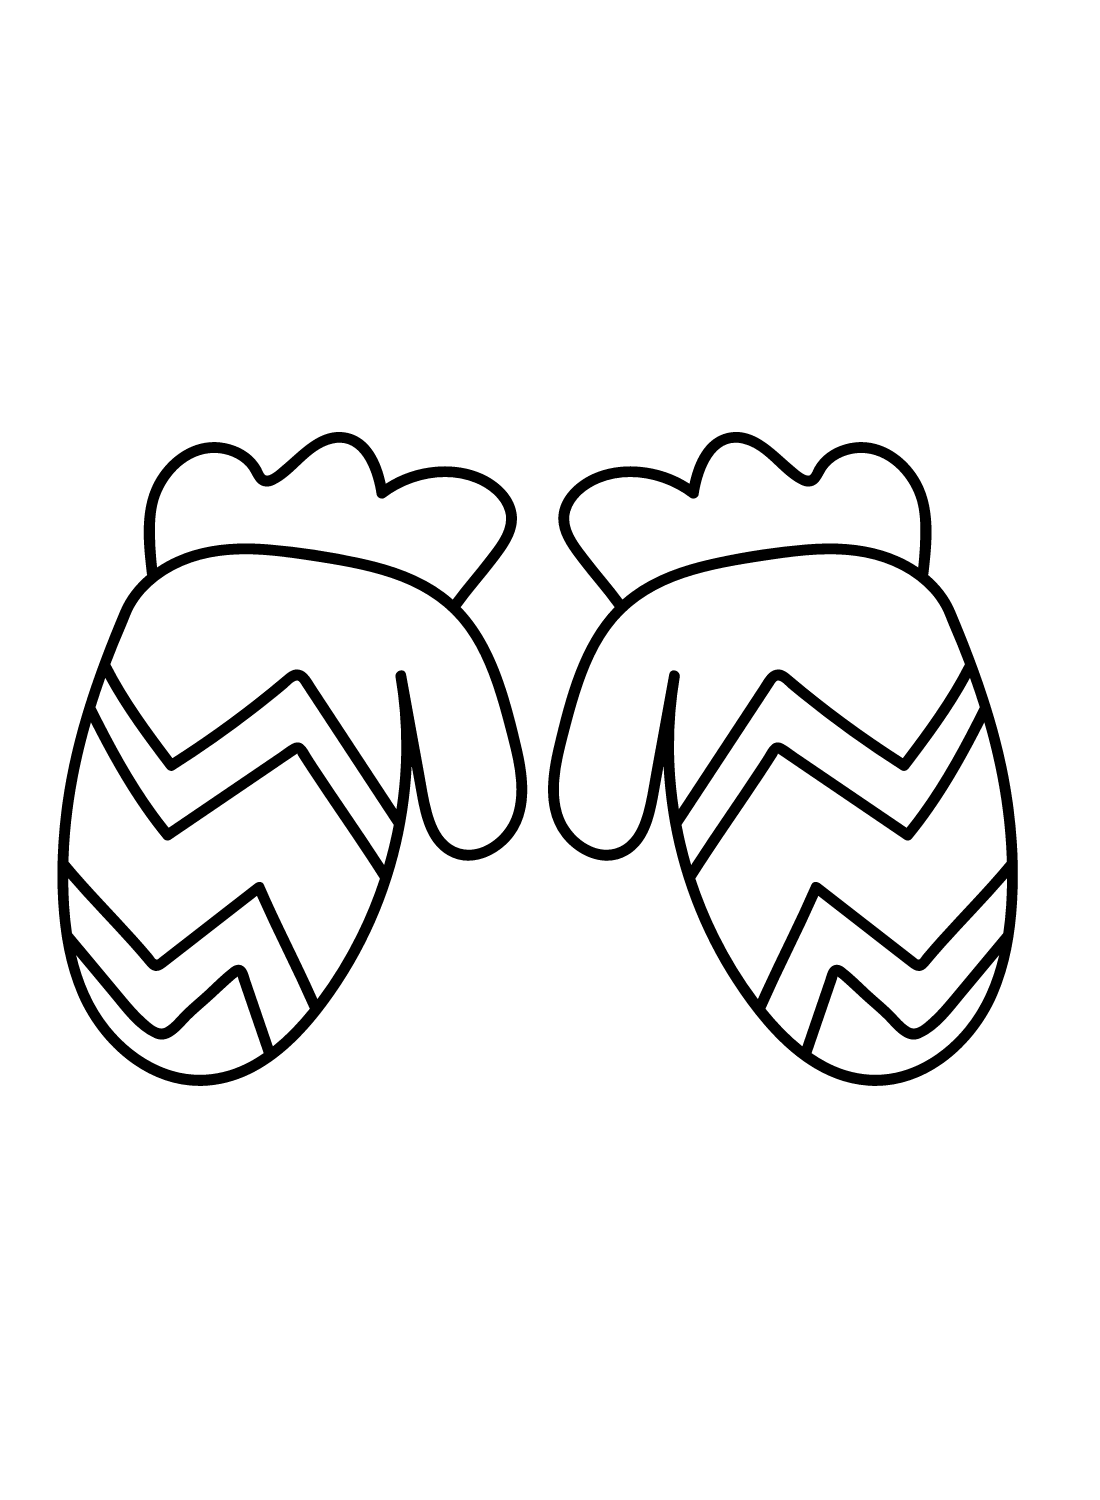 Printable Mittens Winter Coloring Page